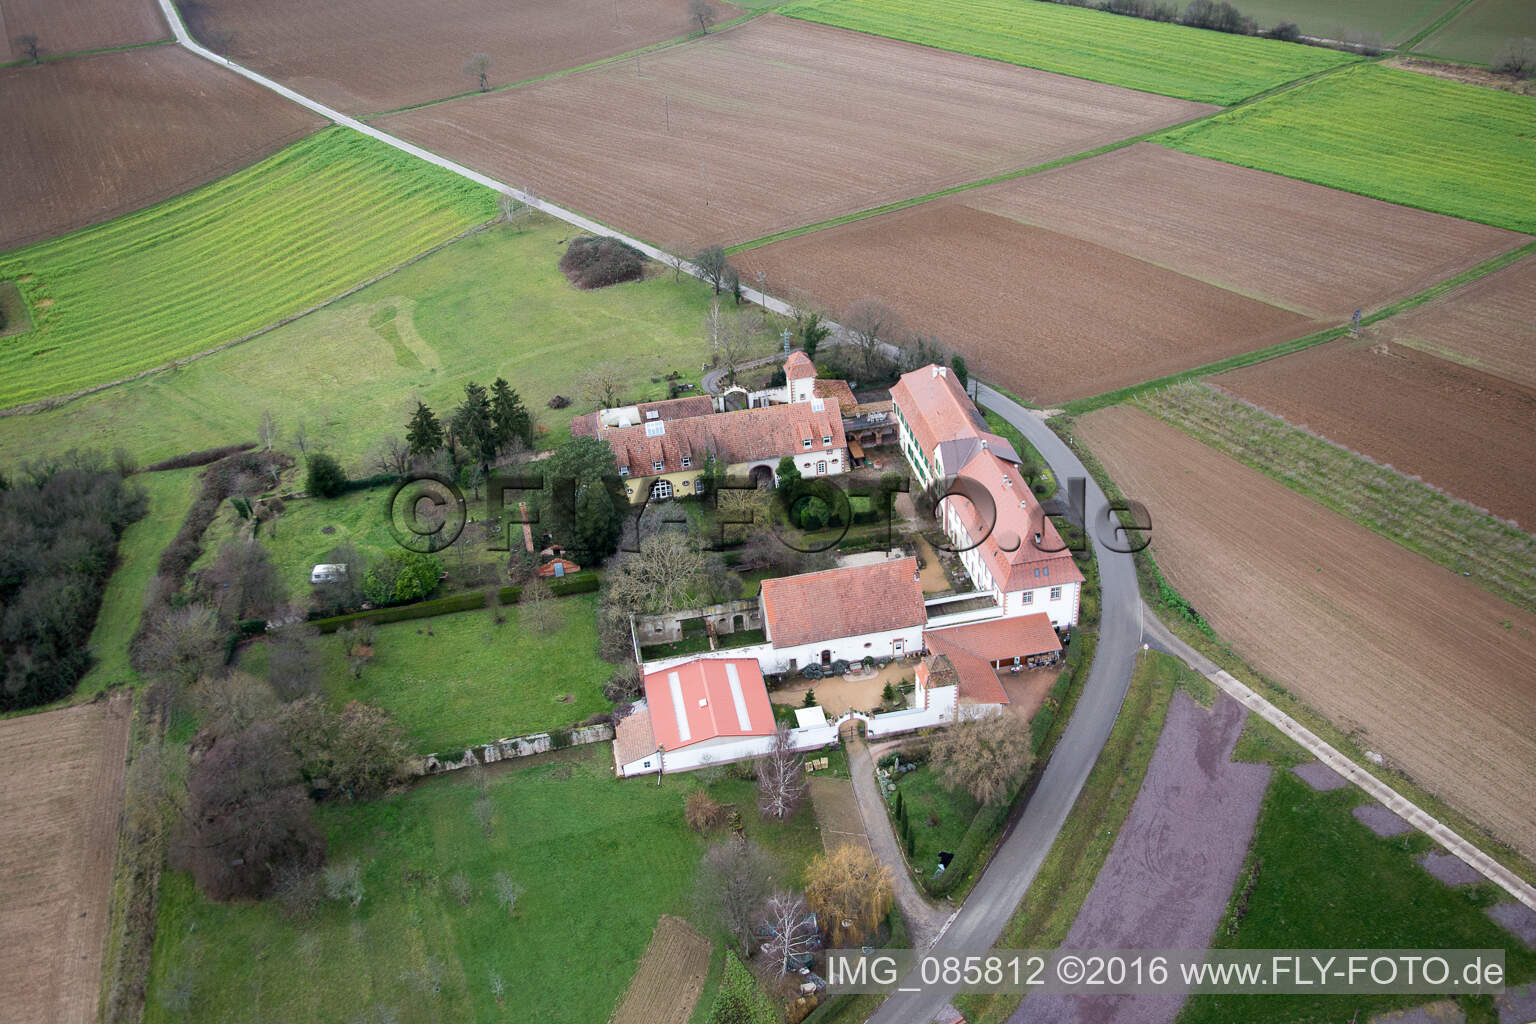 Workshop for Assisted Living of hidden Talents GmbH in the district Haftelhof in Schweighofen in the state Rhineland-Palatinate, Germany viewn from the air